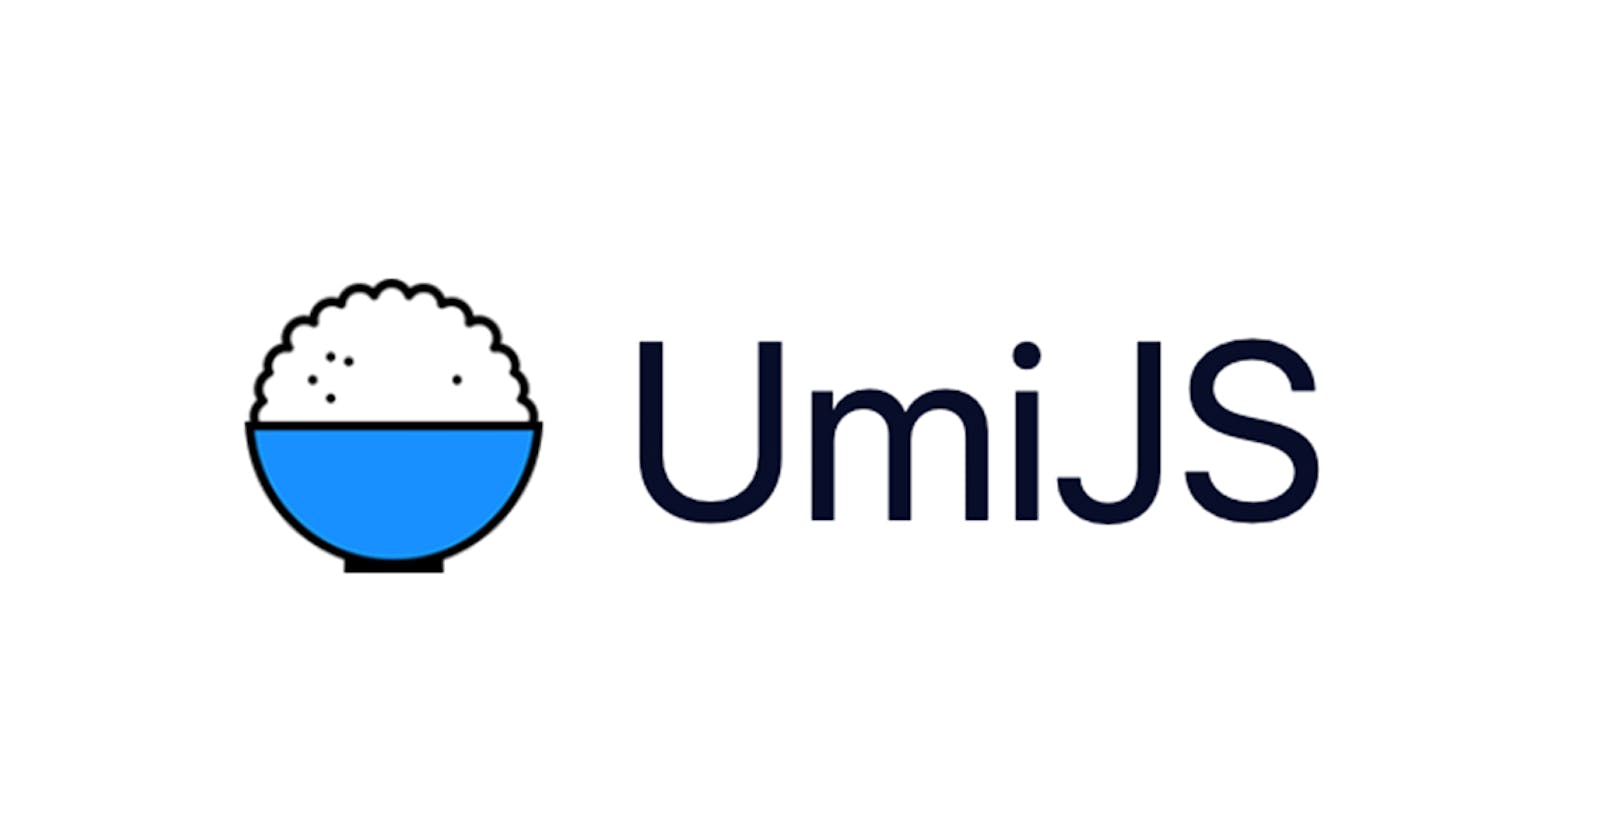 Let us learn about UmiJS